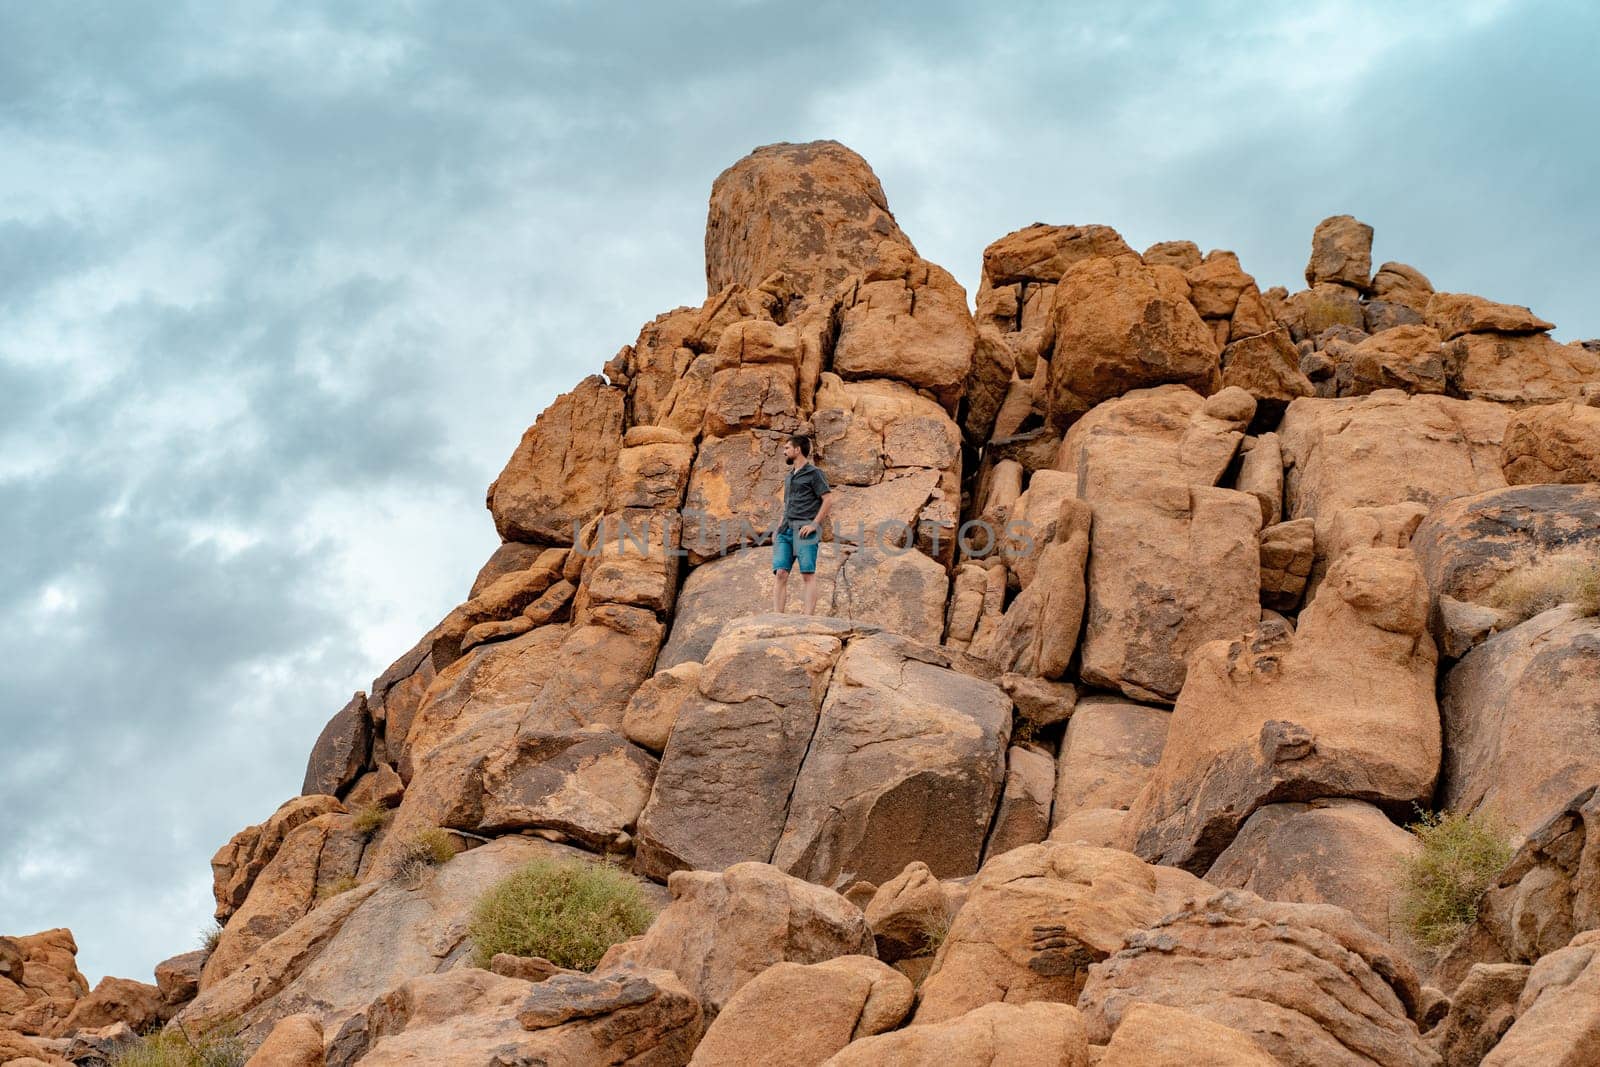 Young man on top of Joshua Tree rocks feeling free in the amazing landscape. by PaulCarr